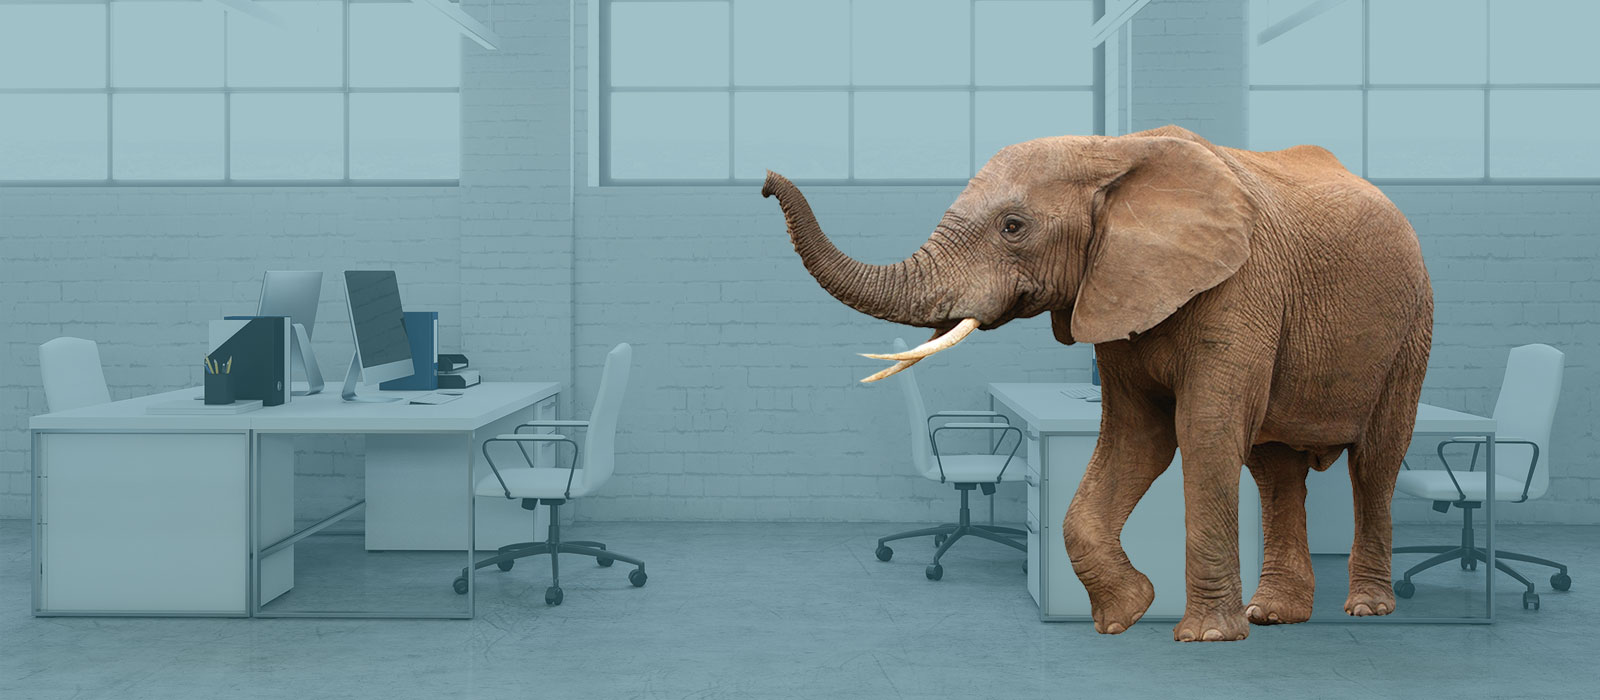 Elephant standing in a modern office with white desks and chairs, large paned windows and brick walls